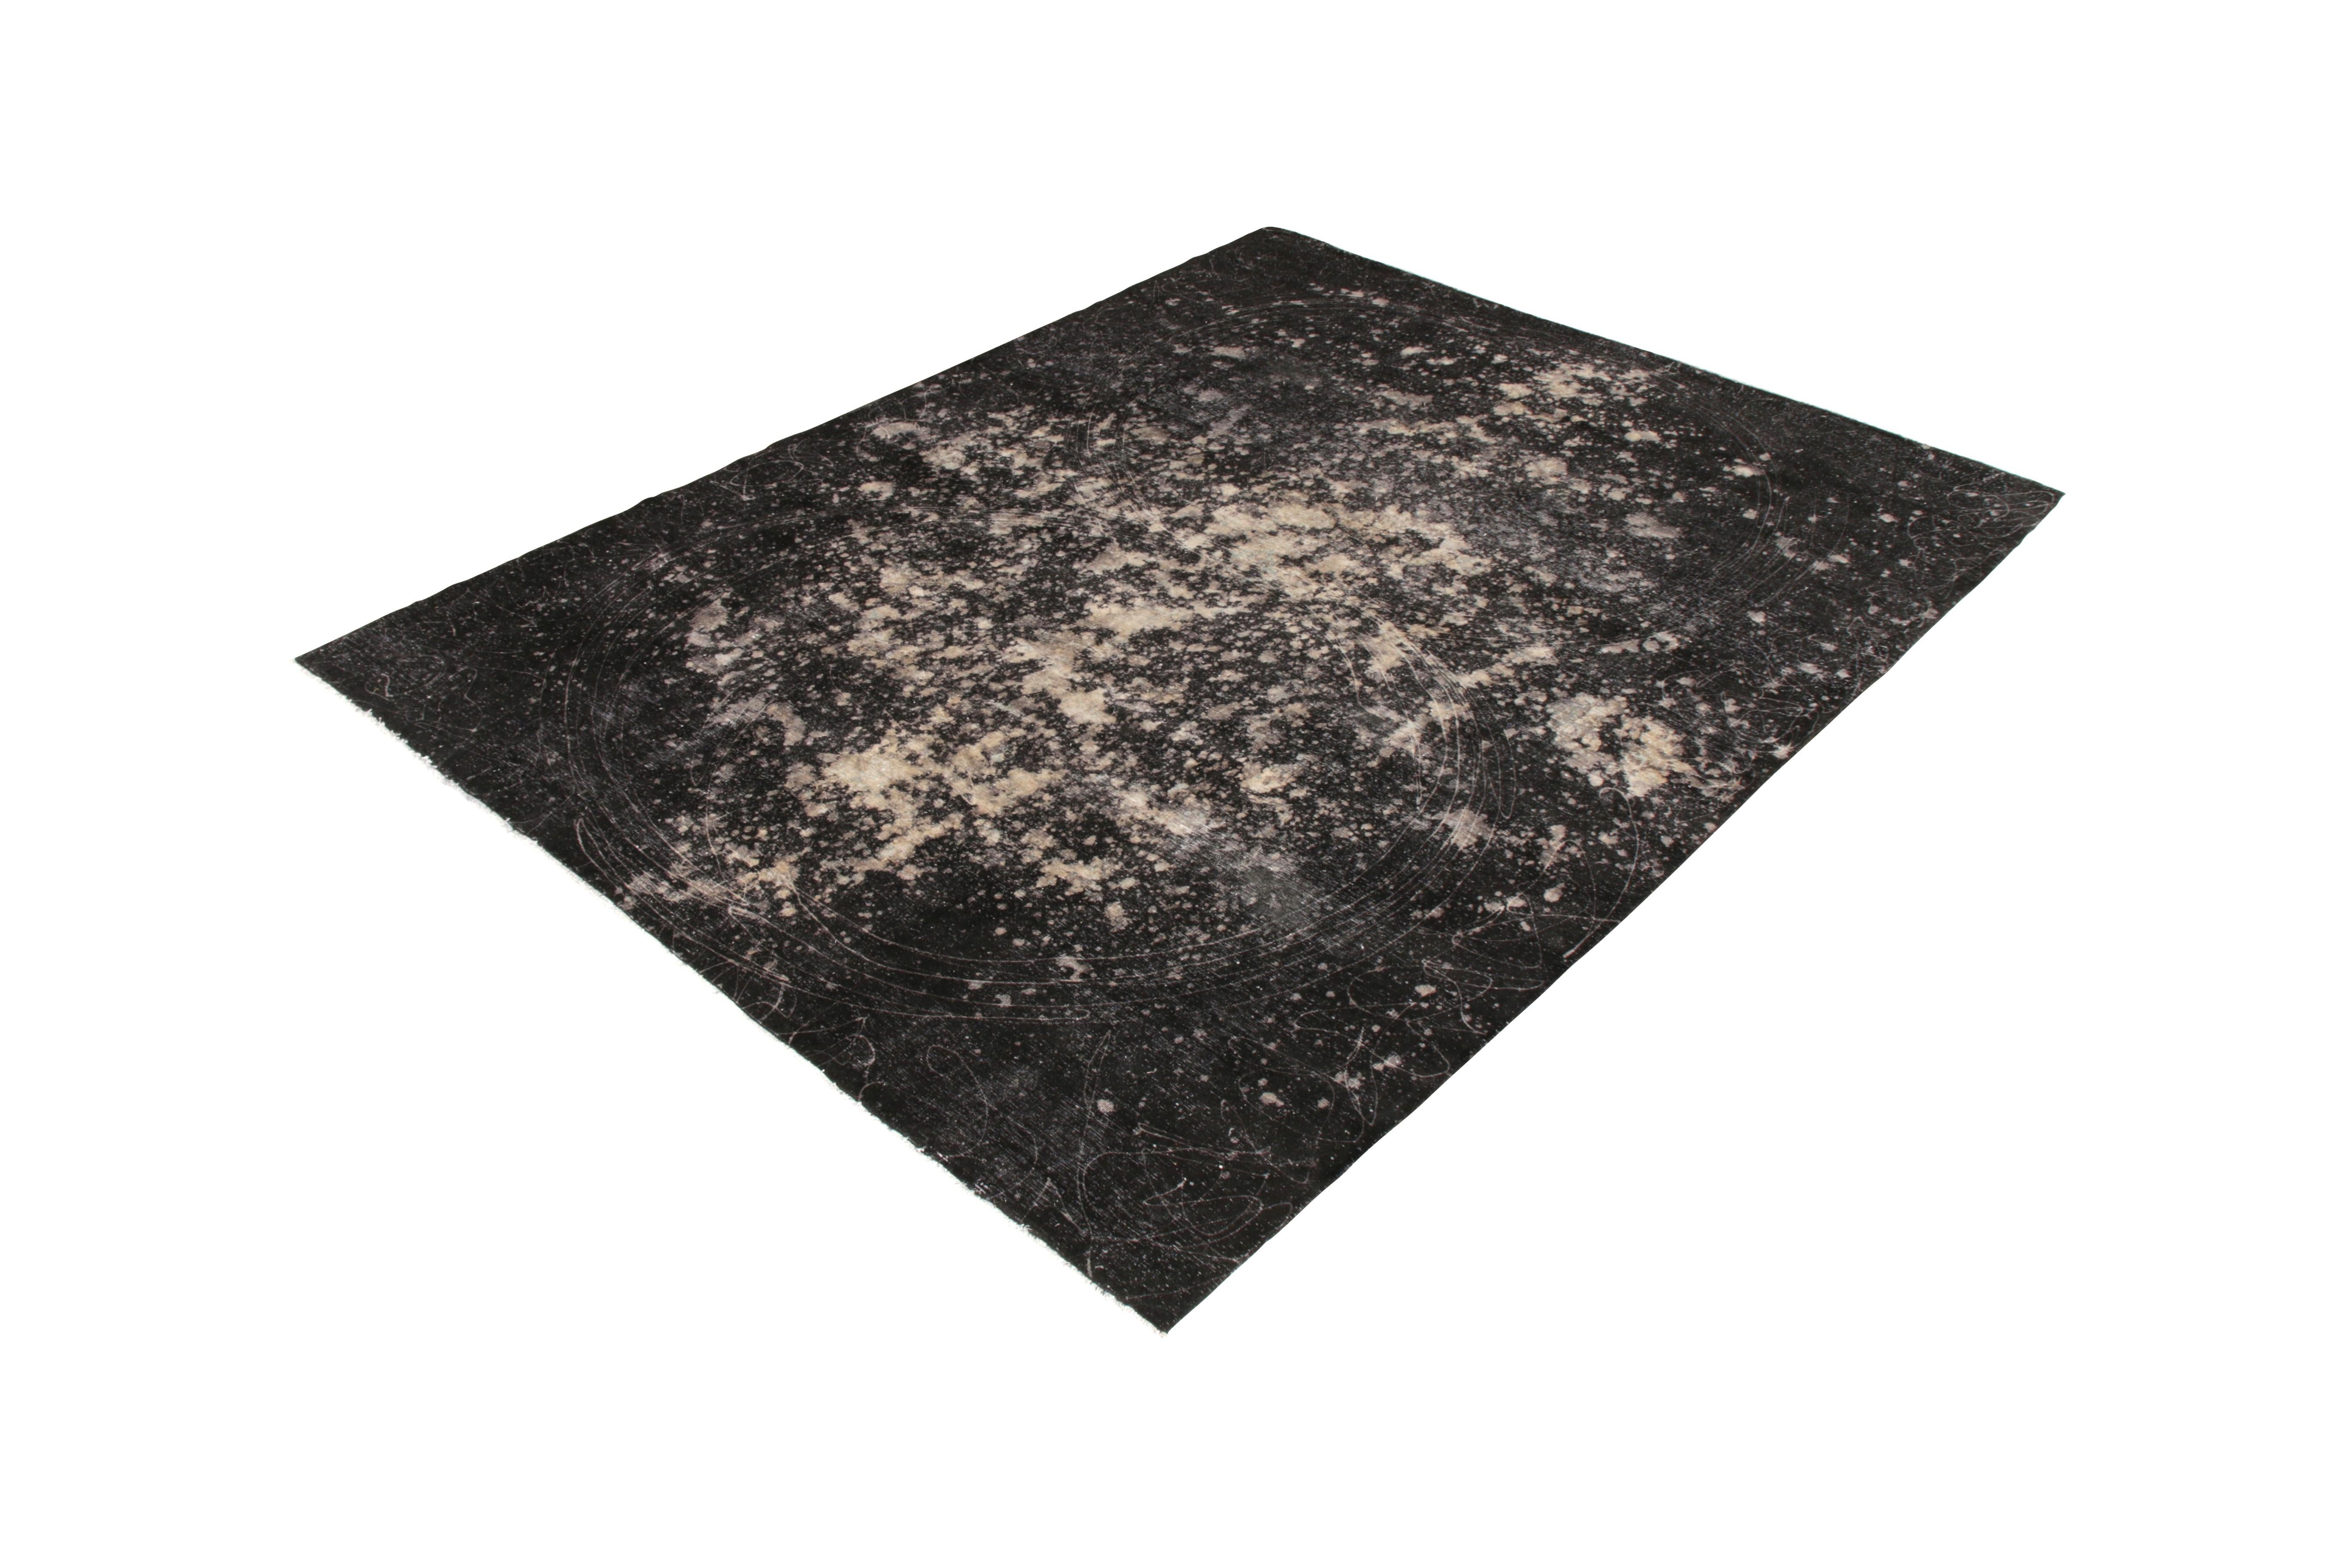 From Rug & Kilim’s New & Modern rug collection, a 10x12 abstract rug of a very rare dye originating from a celebrated atelier in Turkey. Joining our Milky Way line, the positive-negative play of black and white mingles with a painterly play of